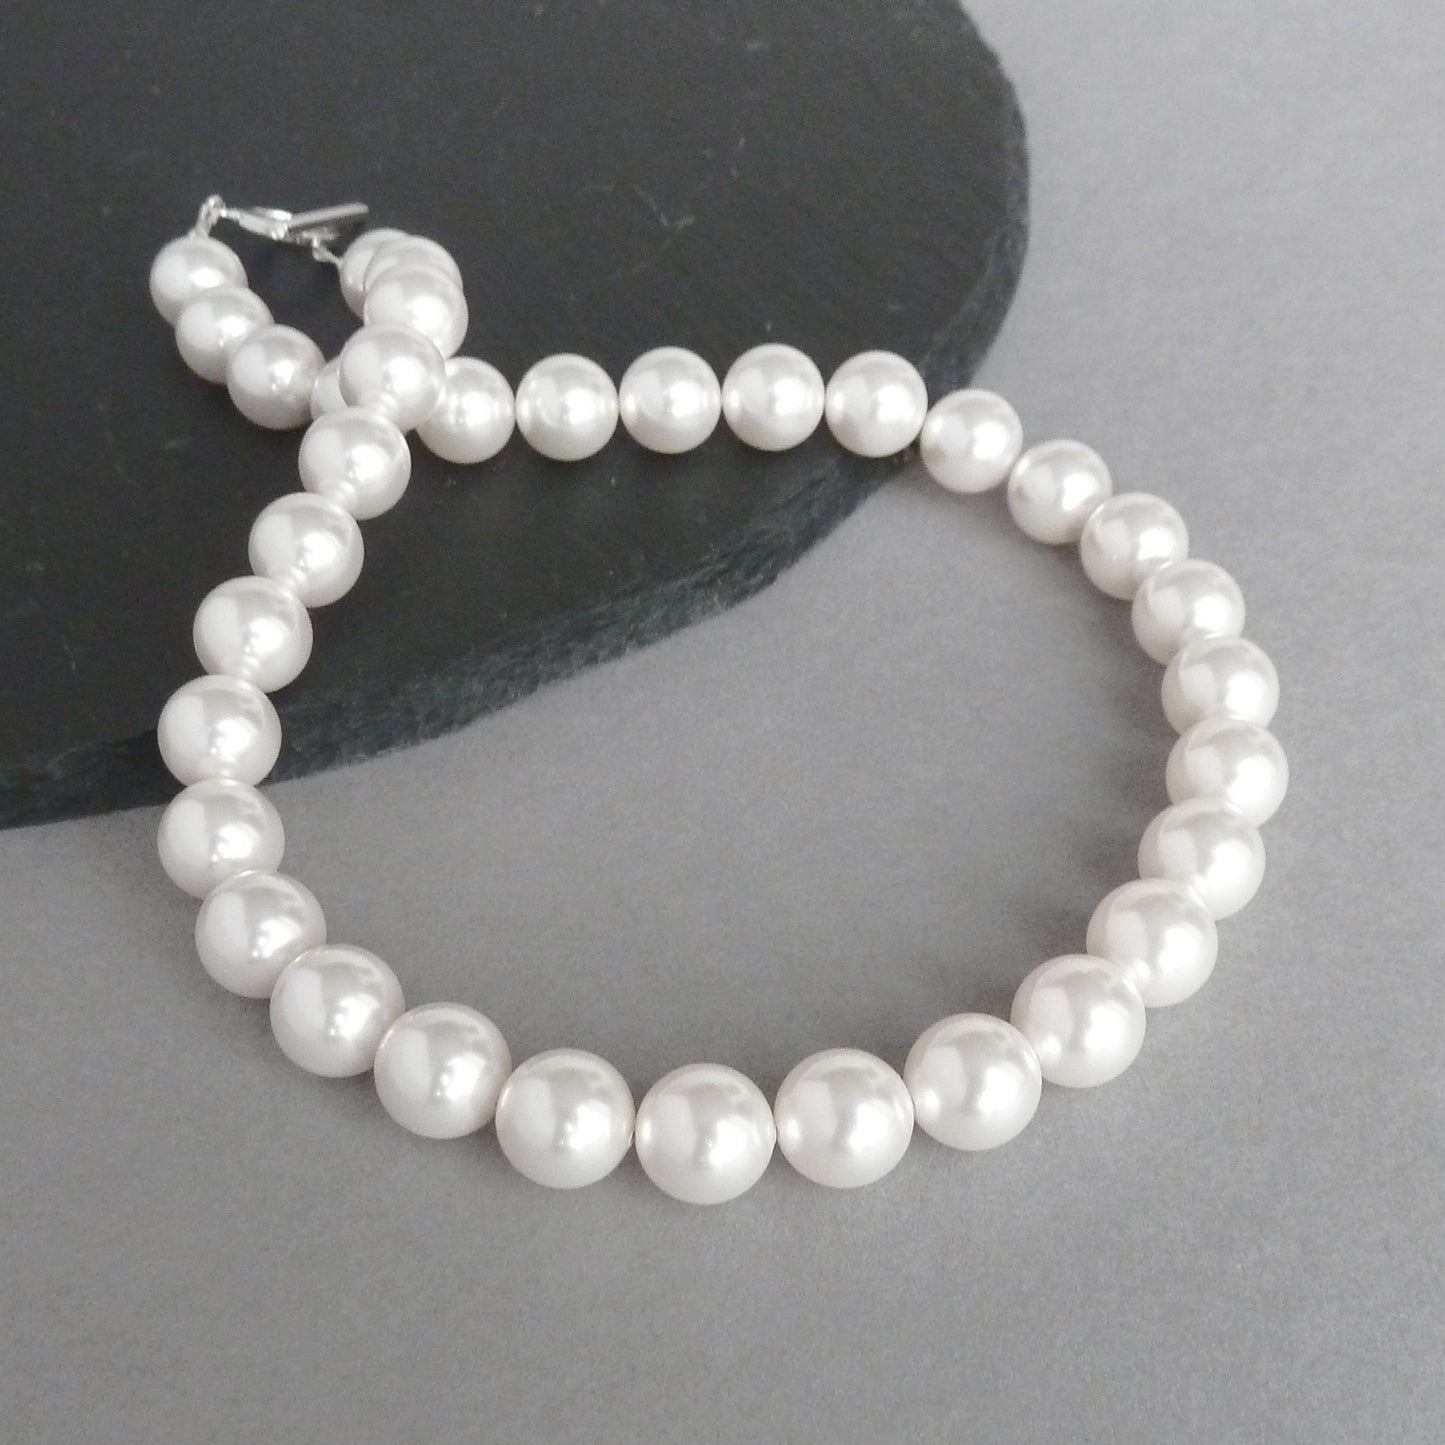 Single strand chunky white pearl necklace